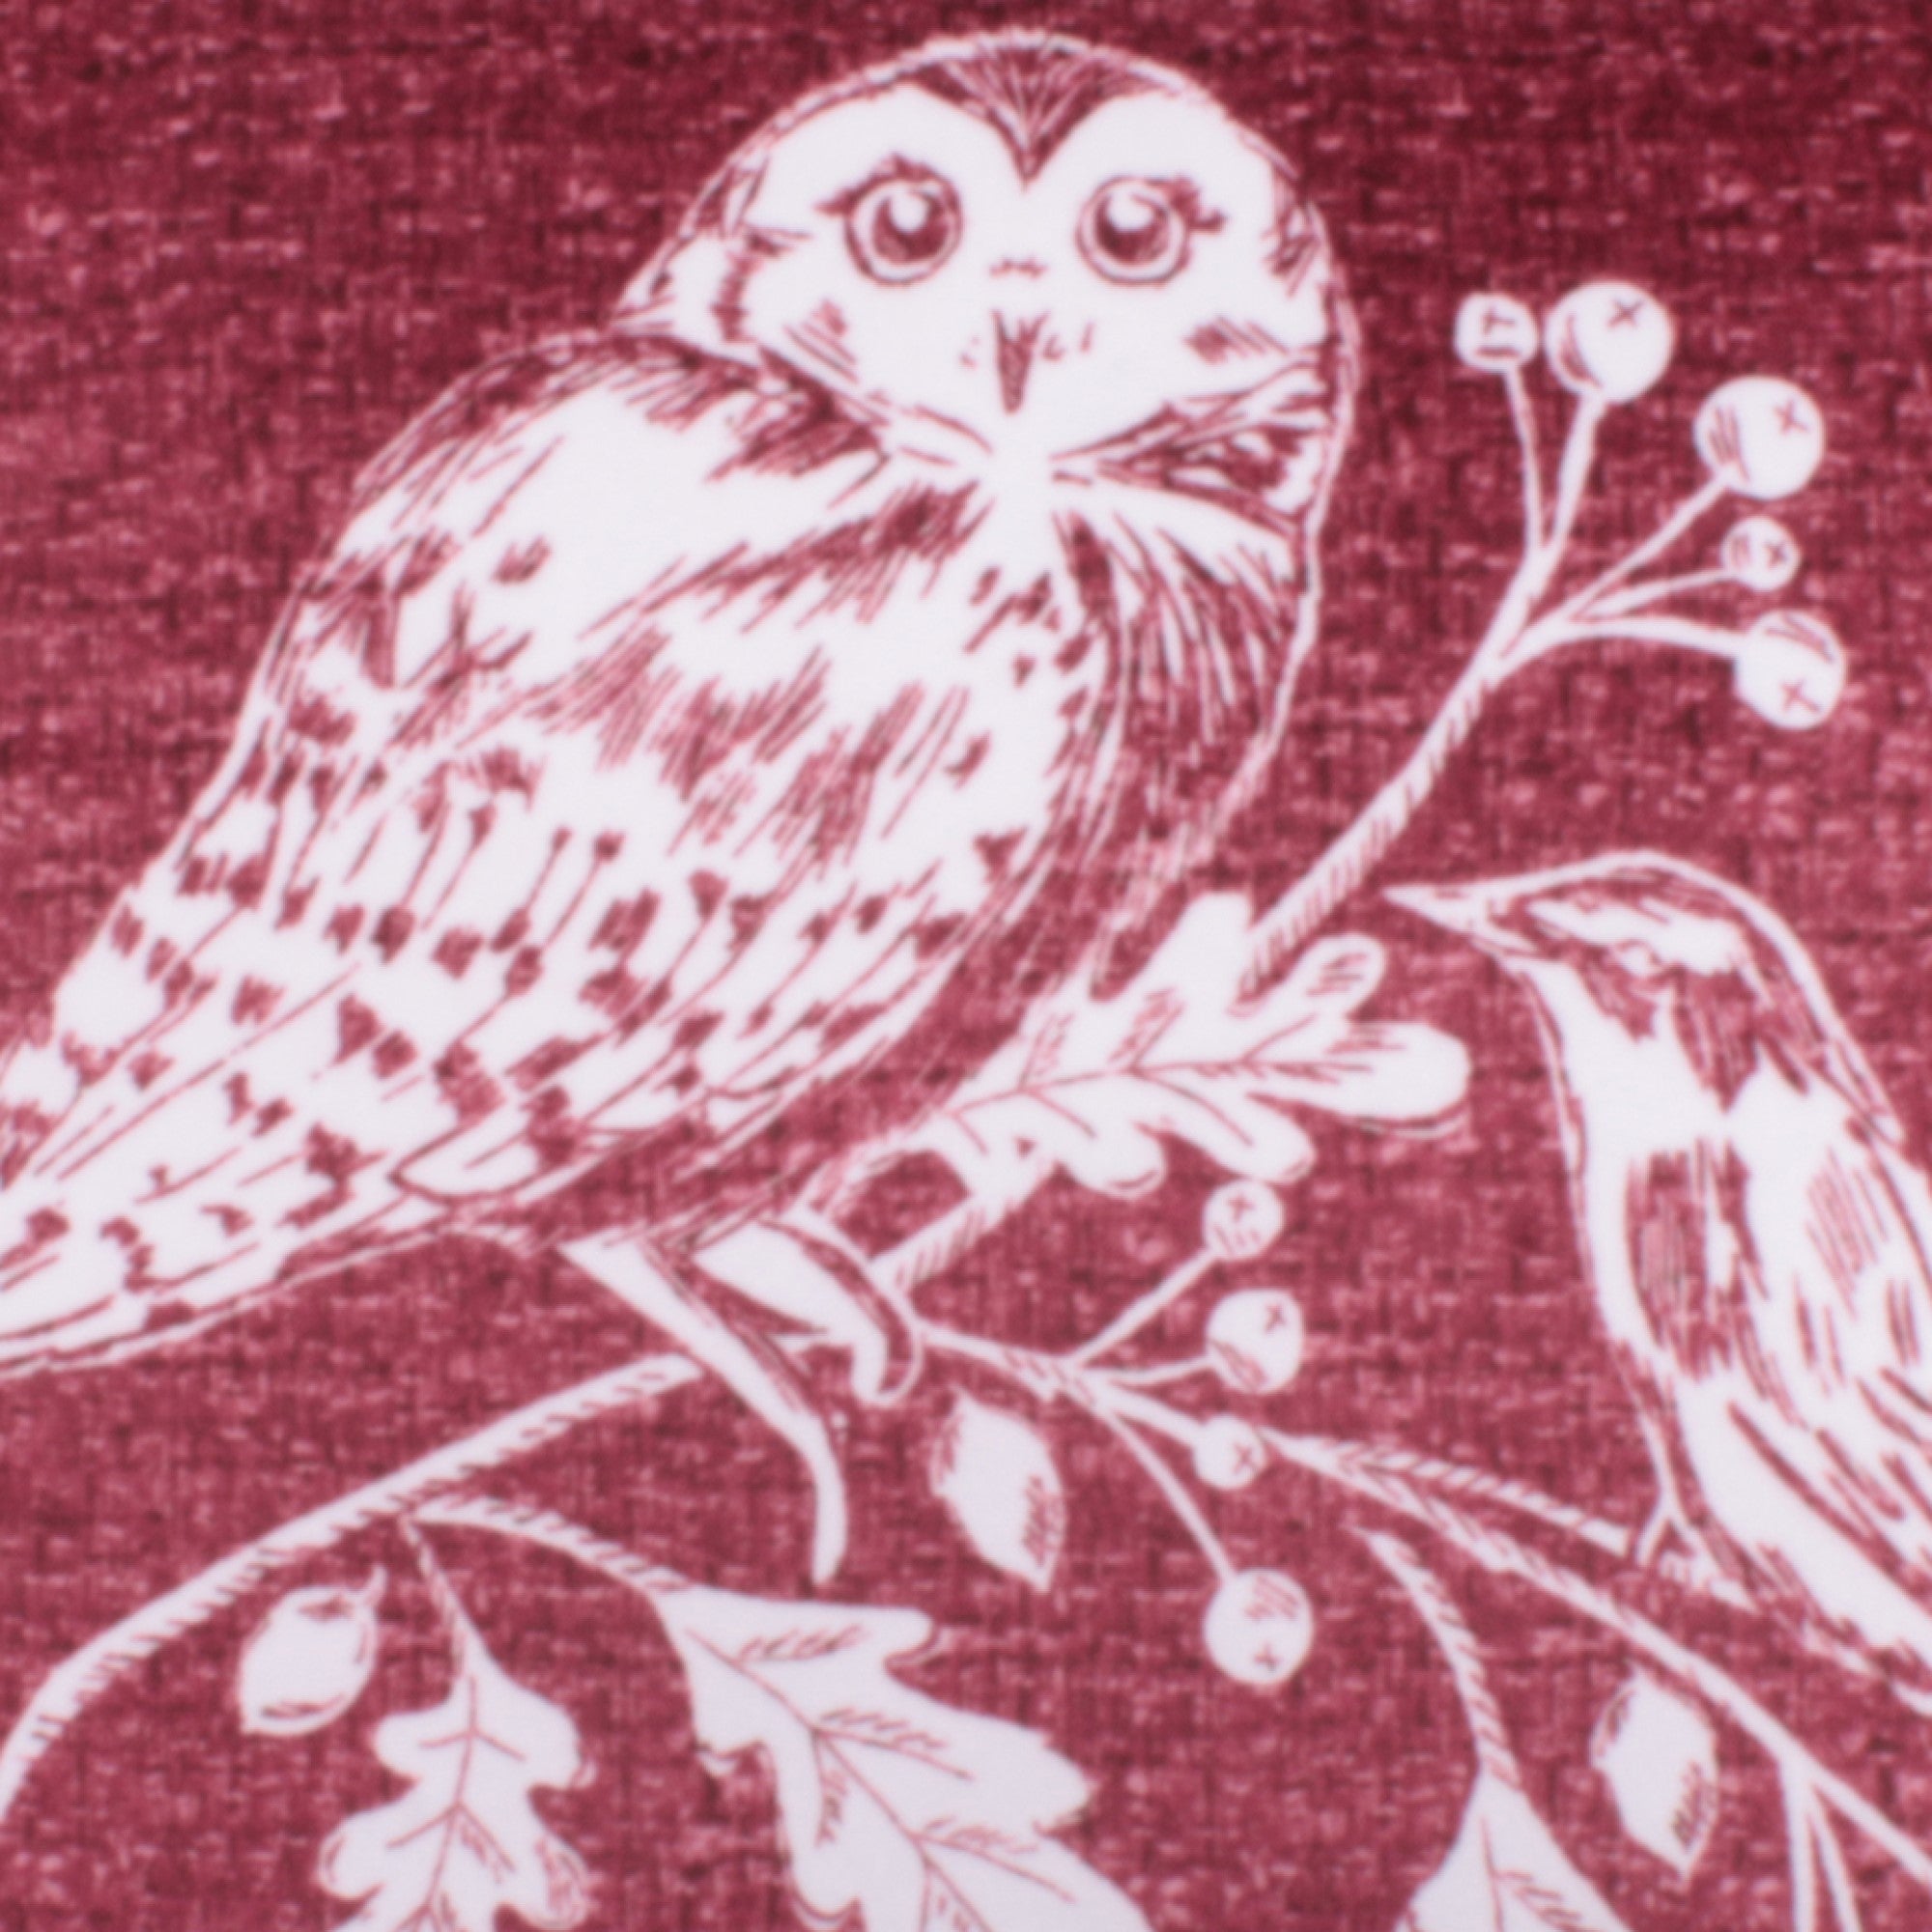 Filled Cushion Woodland Owls by D&D Lodge in Red